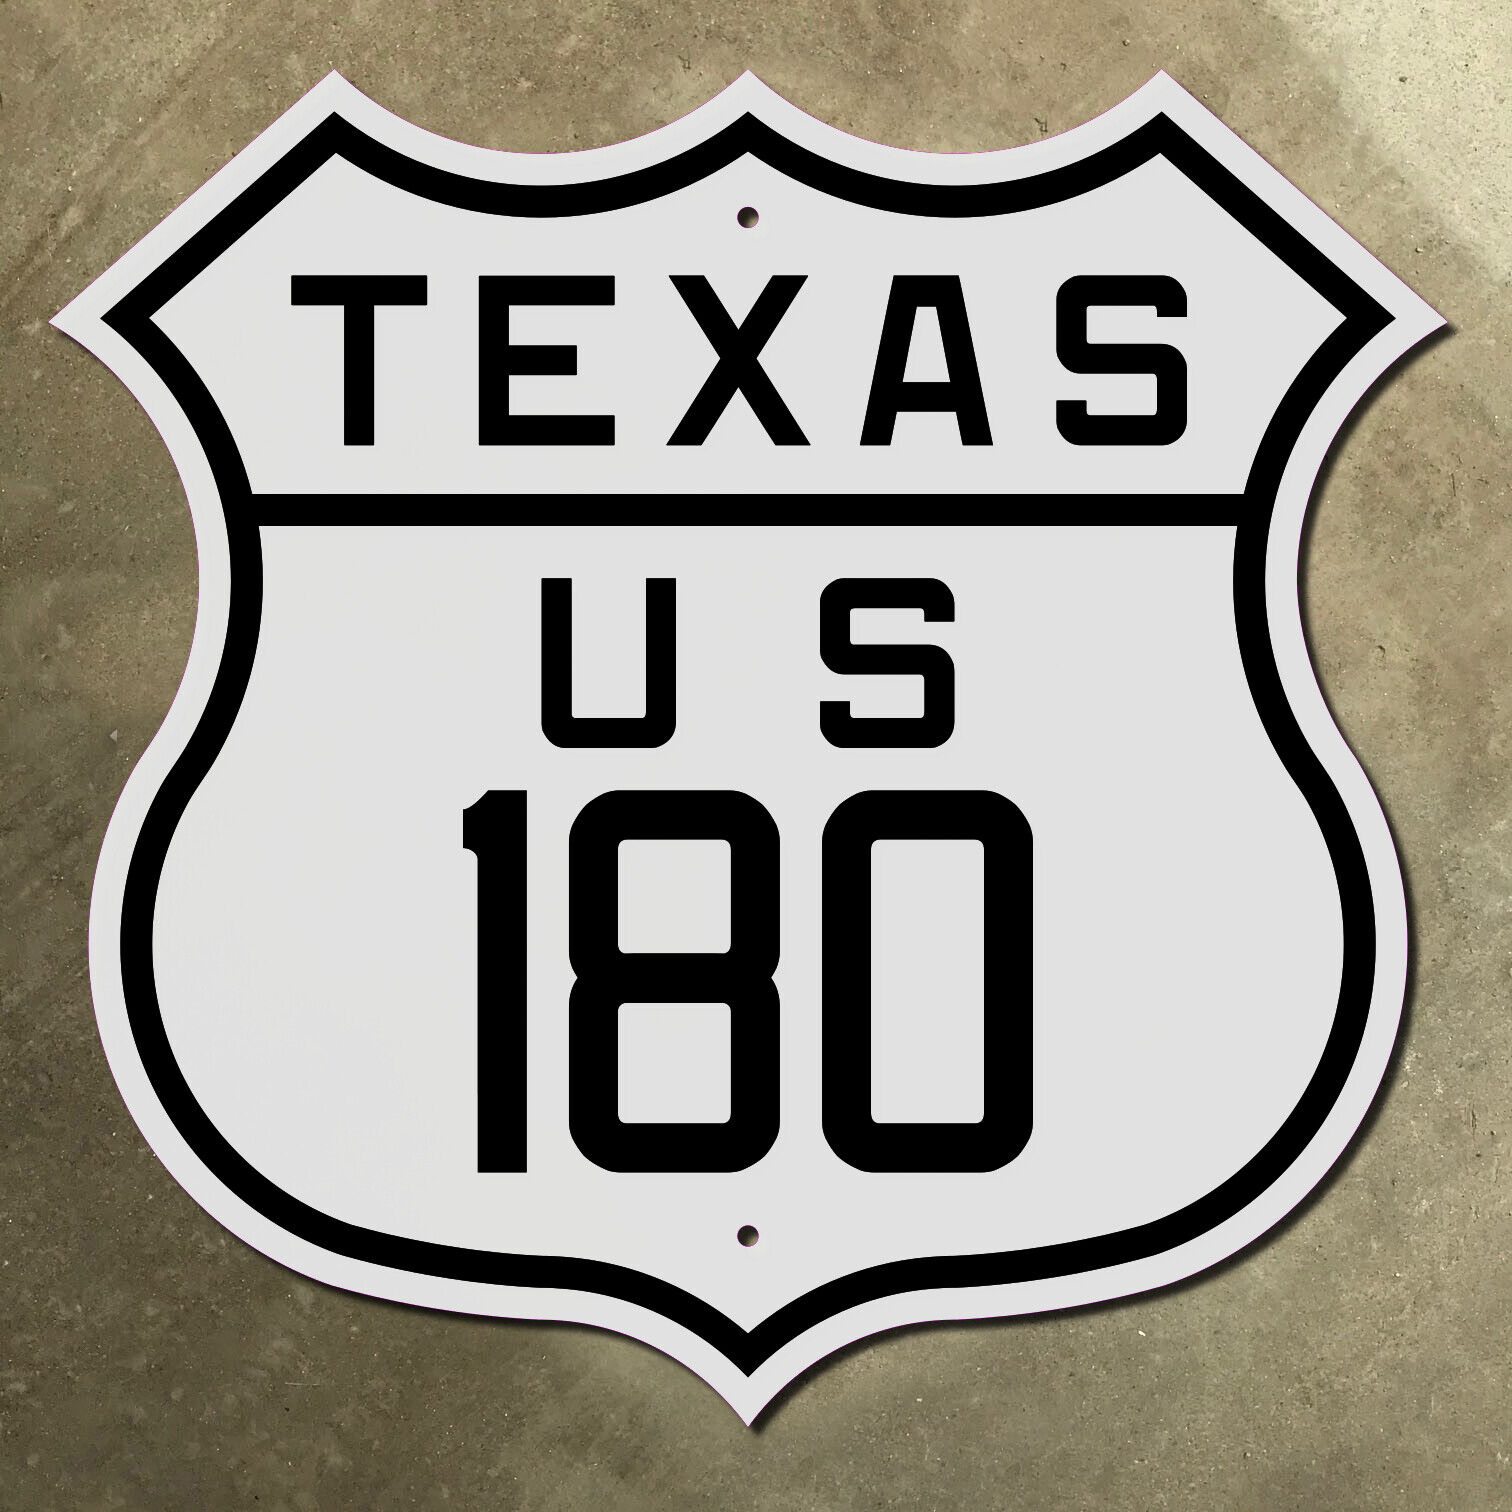 Texas US highway 180 El Paso Snyder Fort Worth route shield 1926 road sign 16x16